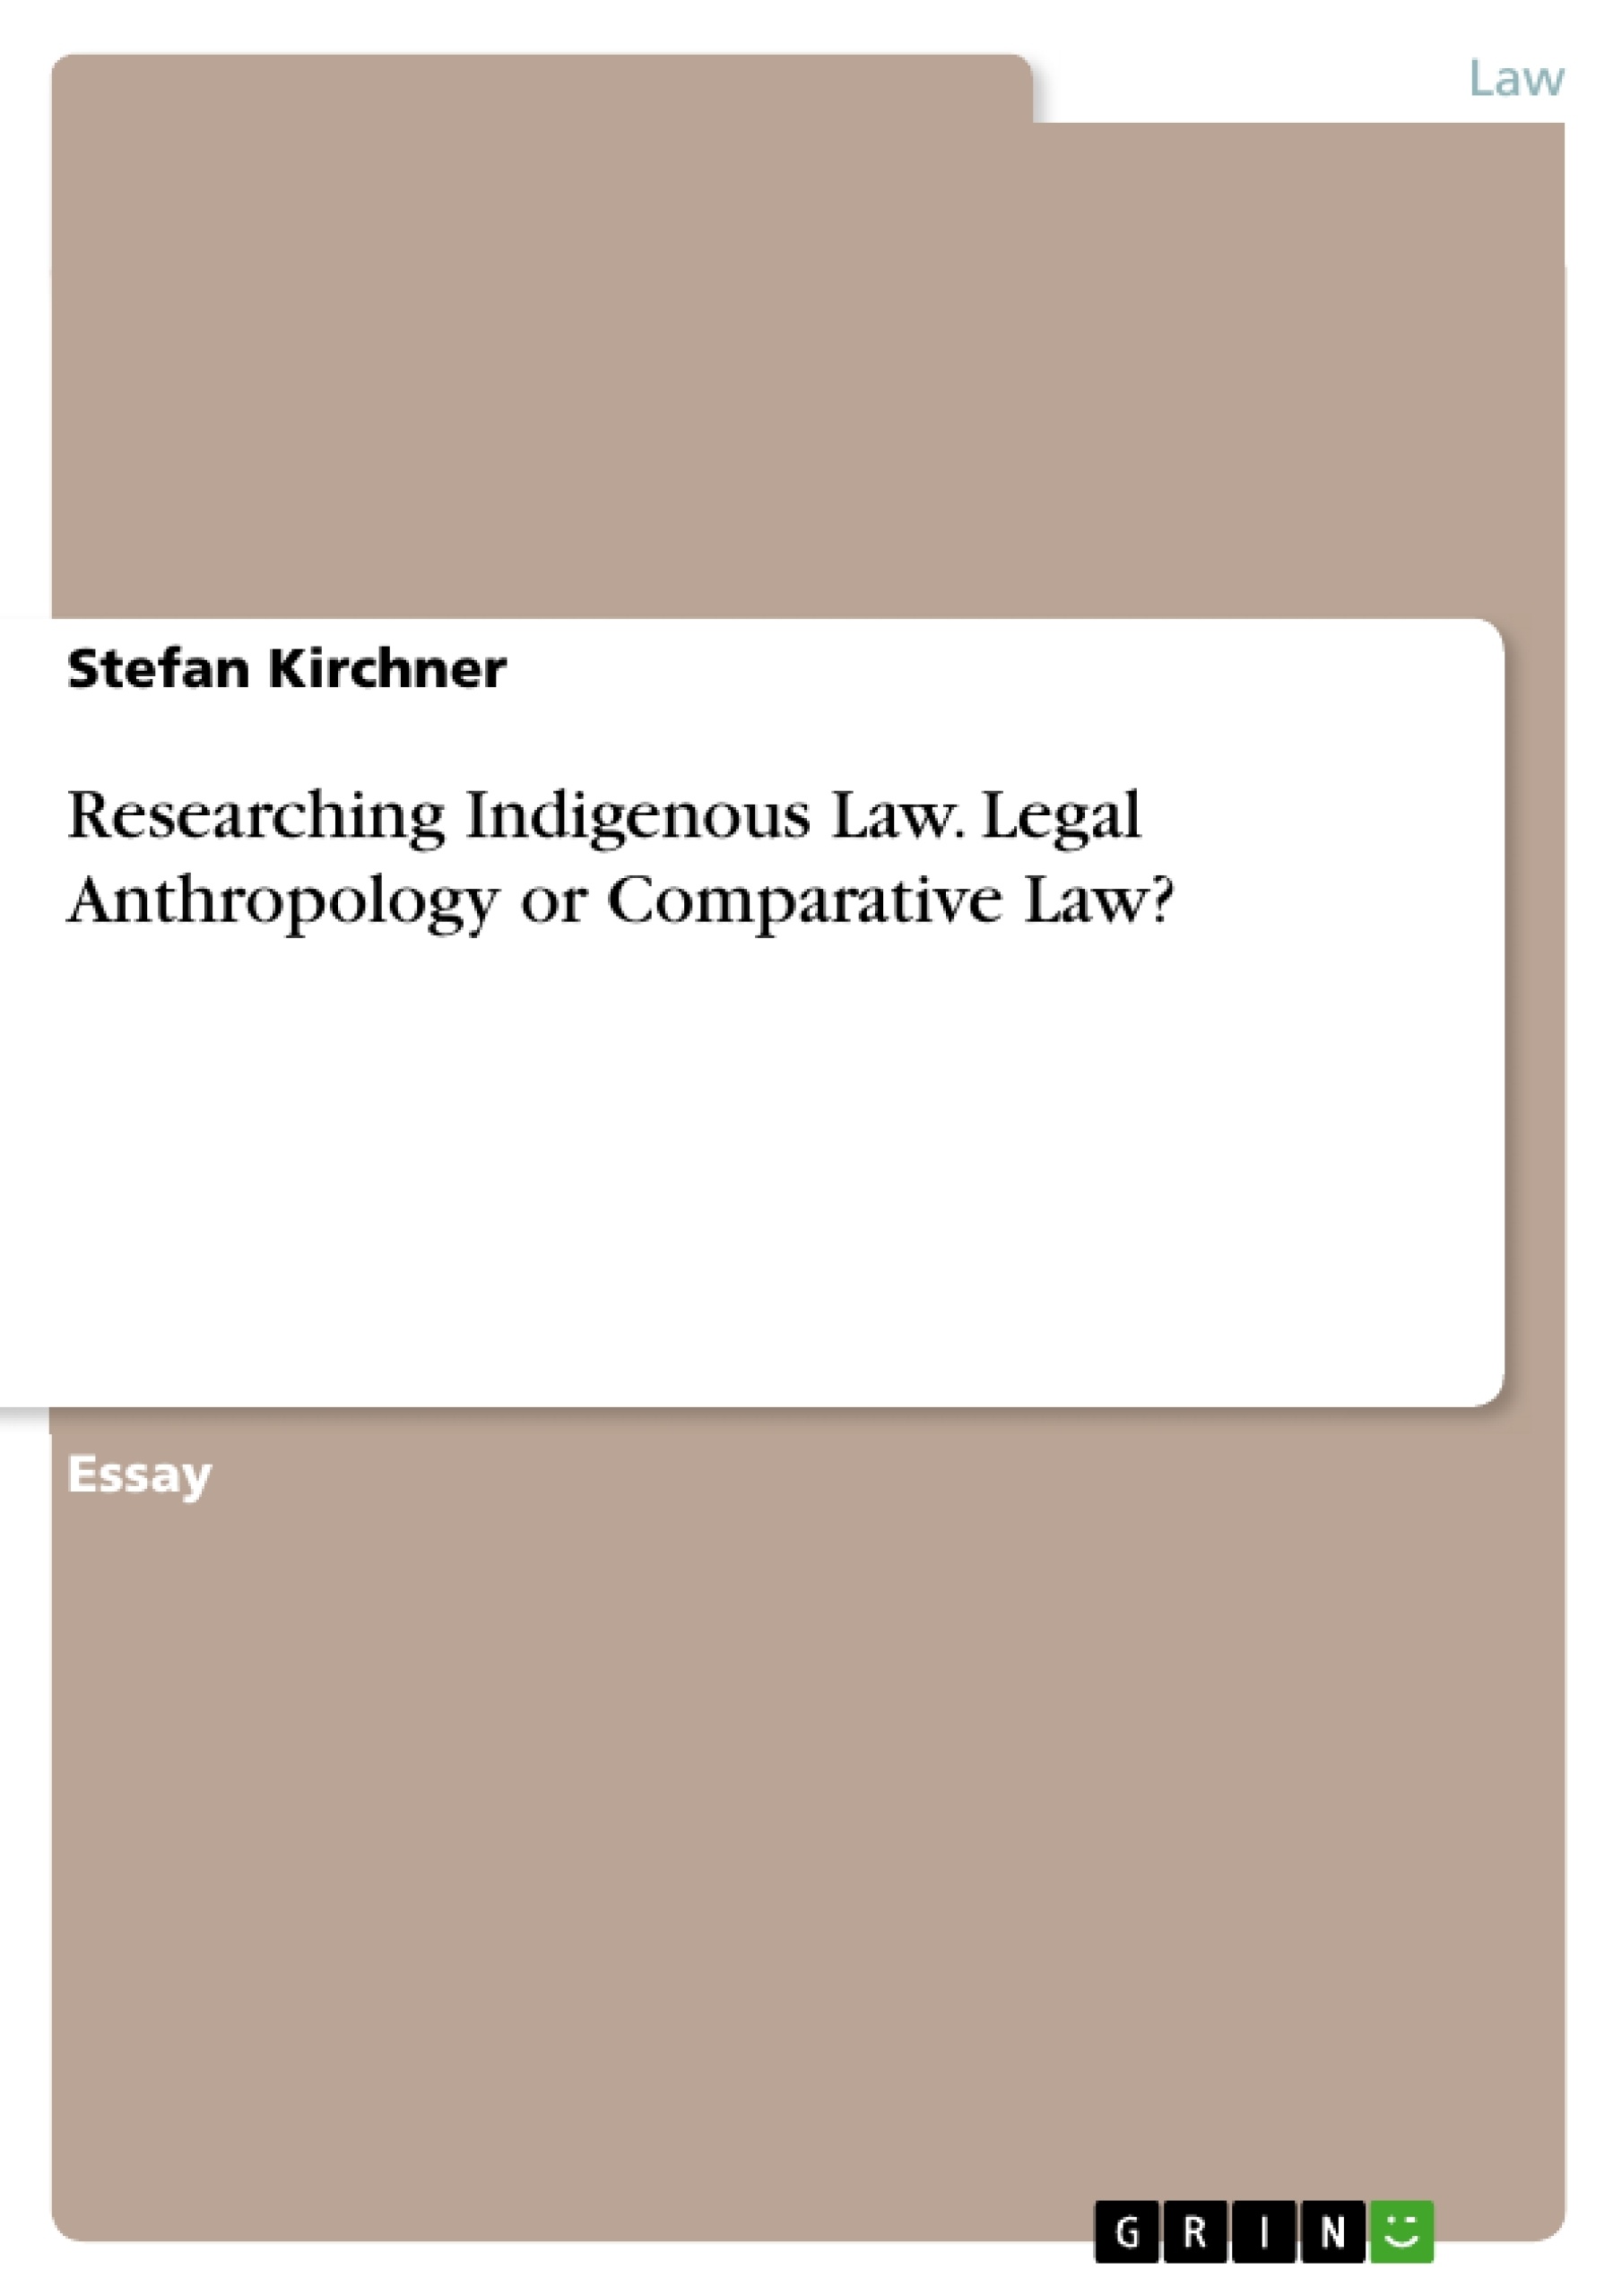 Title: Researching Indigenous Law. Legal Anthropology or Comparative Law?